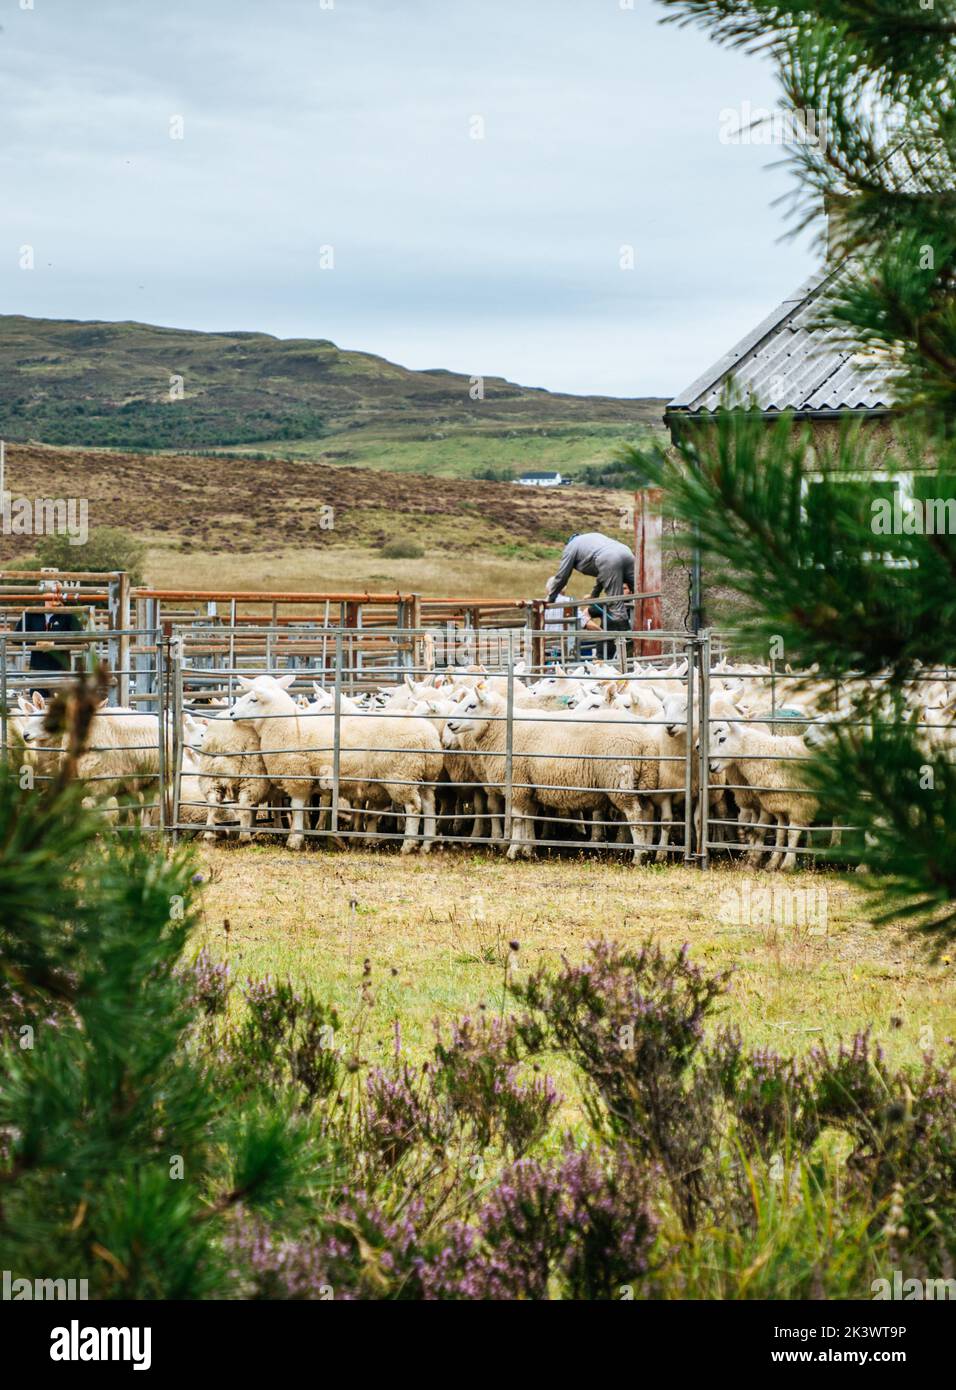 Herd of Sheep at a Sheep auction in the Scottish Highlands on the Isle of Skye, Scotland Stock Photo